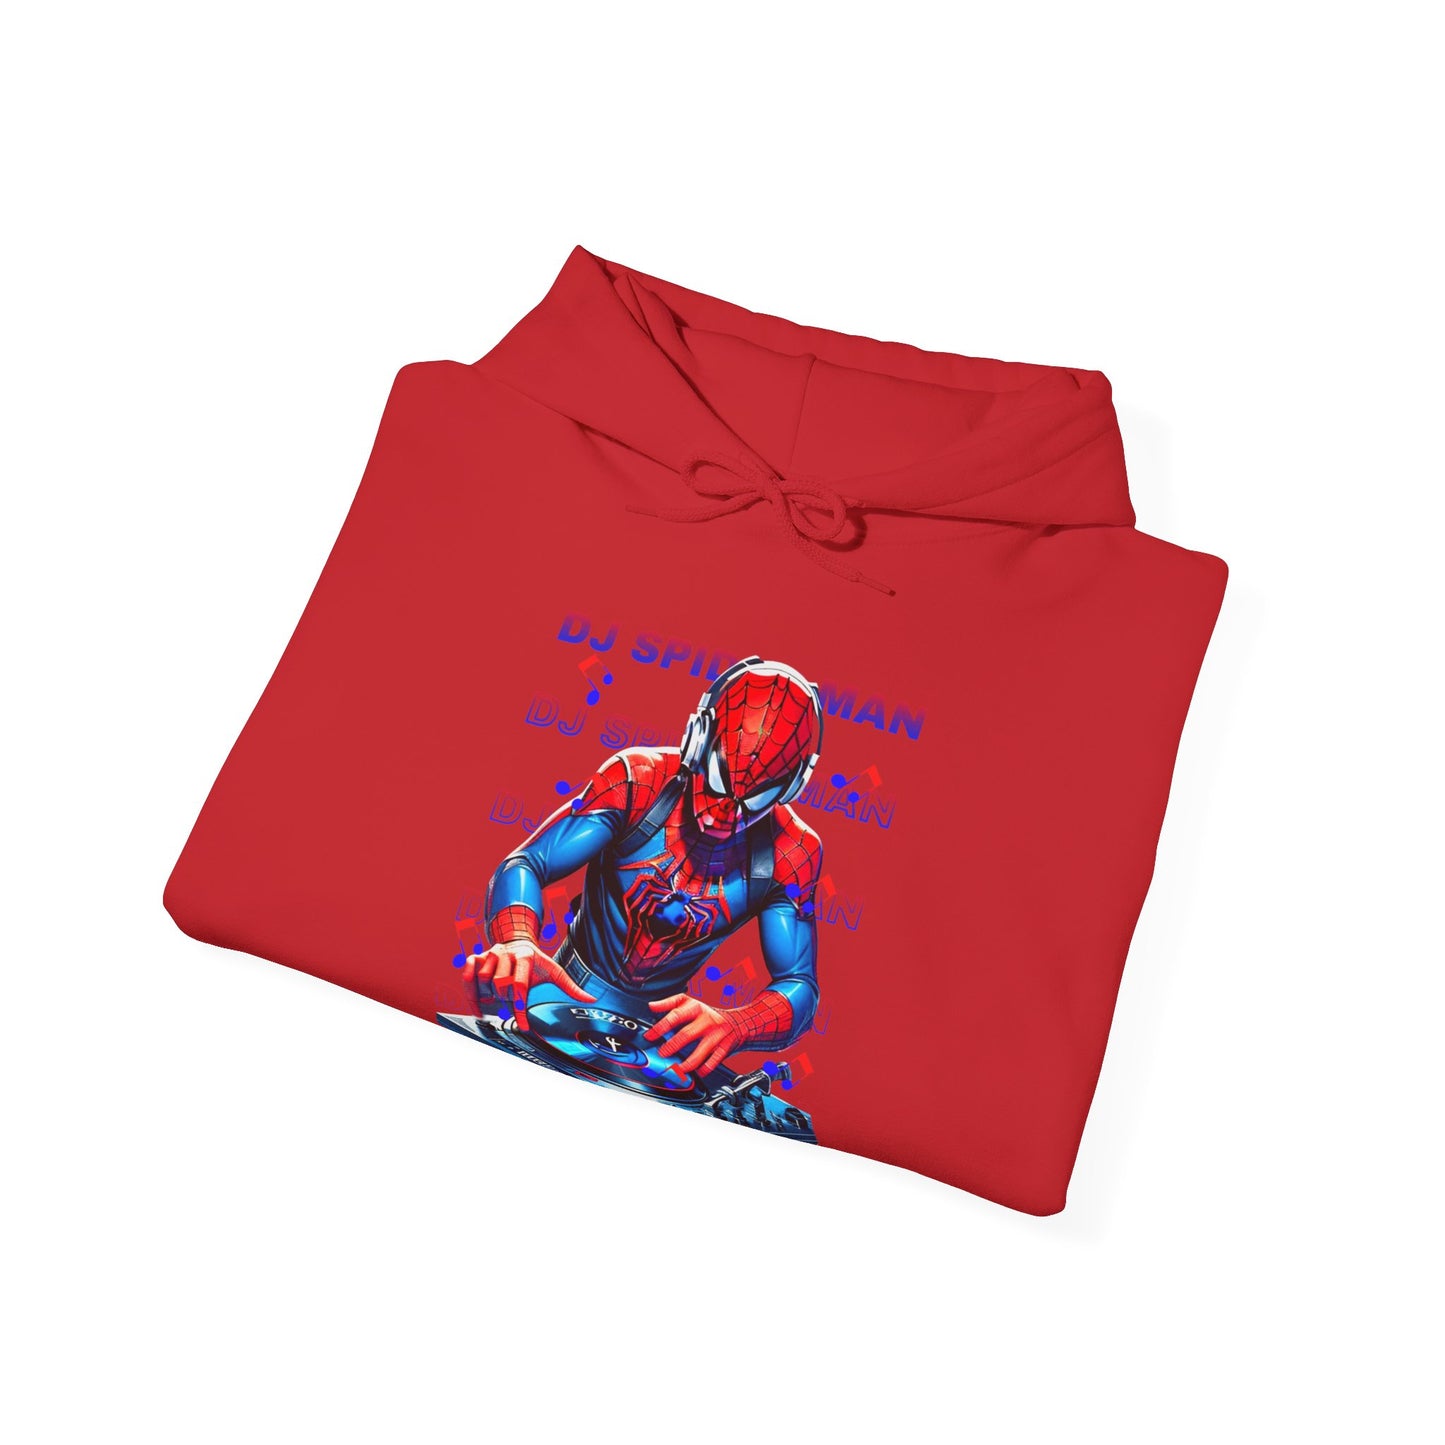 Funny DJ Spider Man High Quality Cleveland Cavaliers Unisex Heavy Blend™ Hoodie